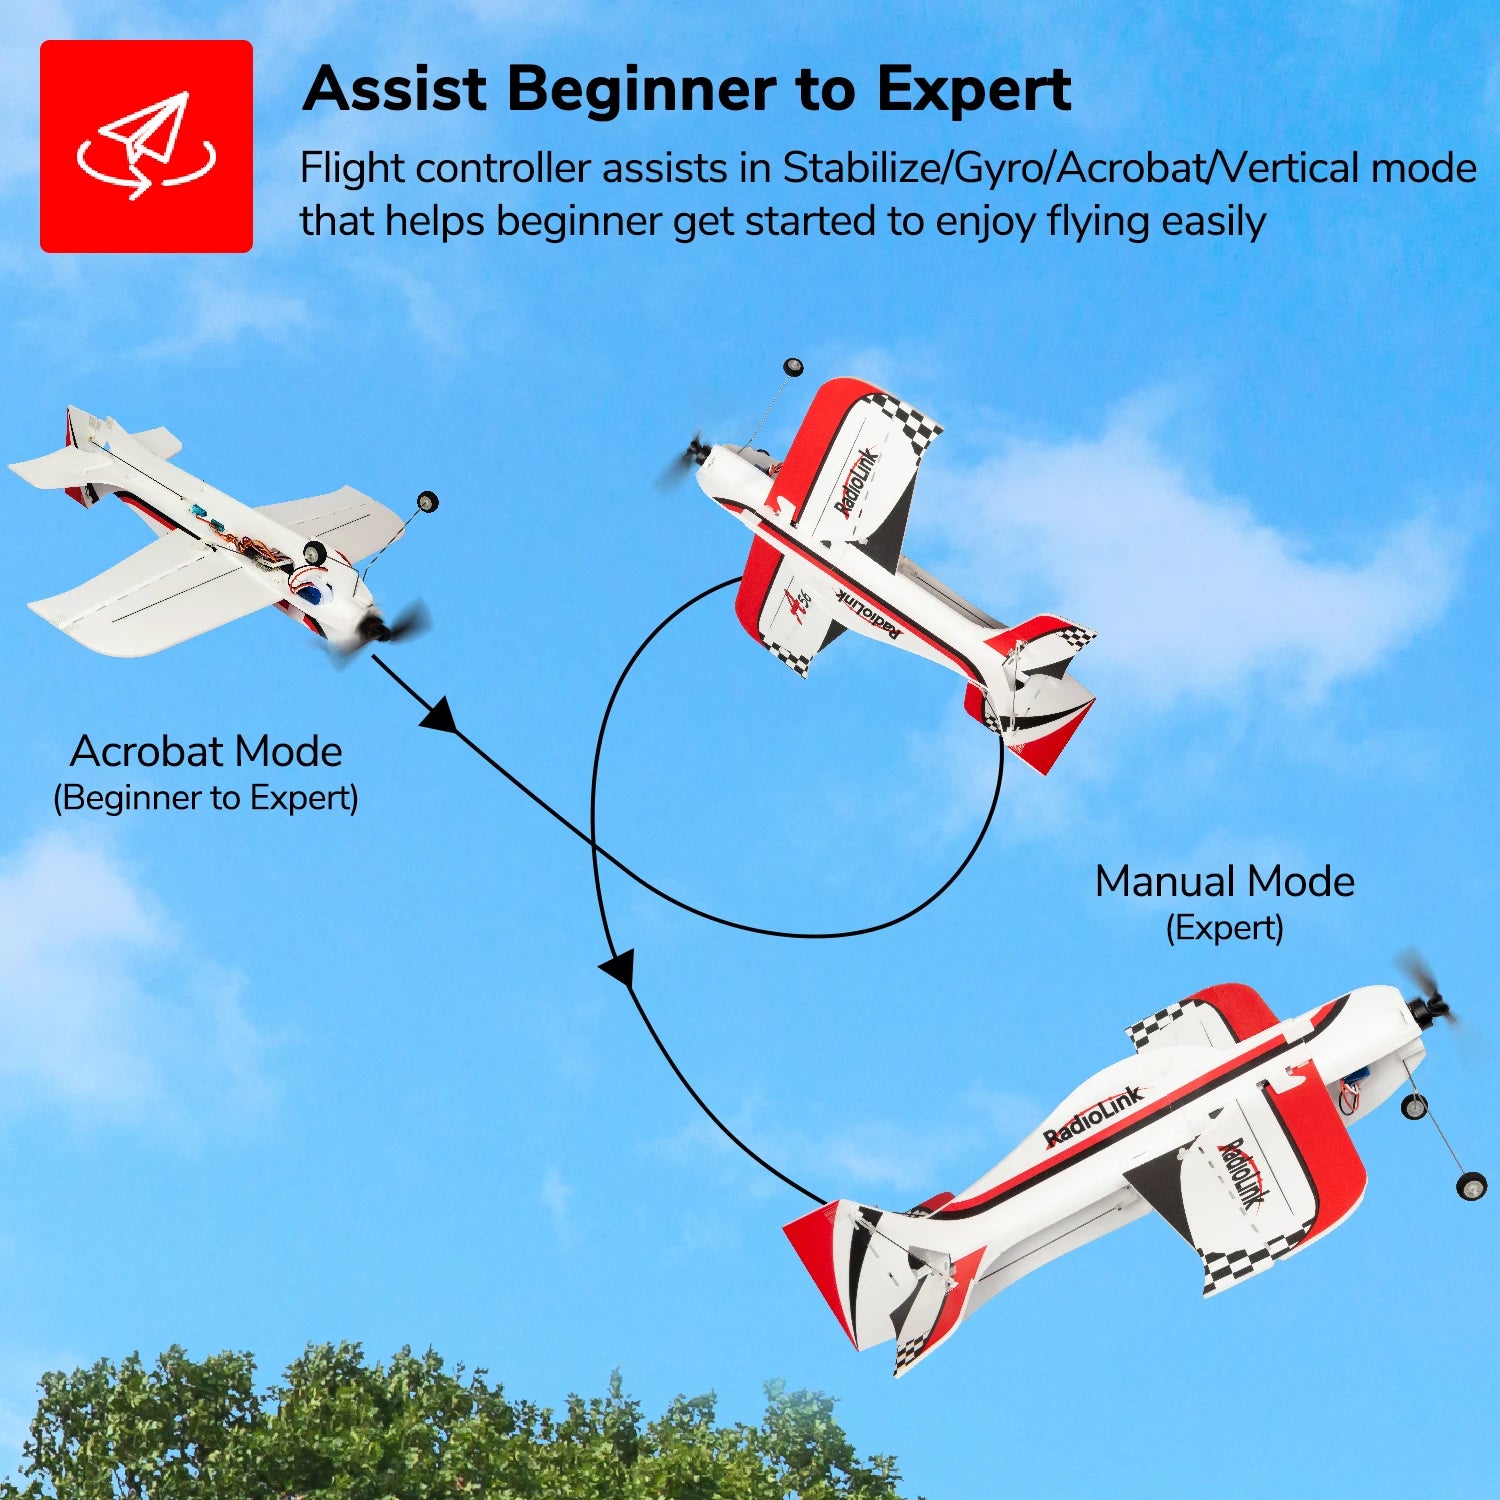 Radiolink A560 4CH RC Airplane, Assist Beginner to Expert Flight controller assists in Stabilize/Gyro